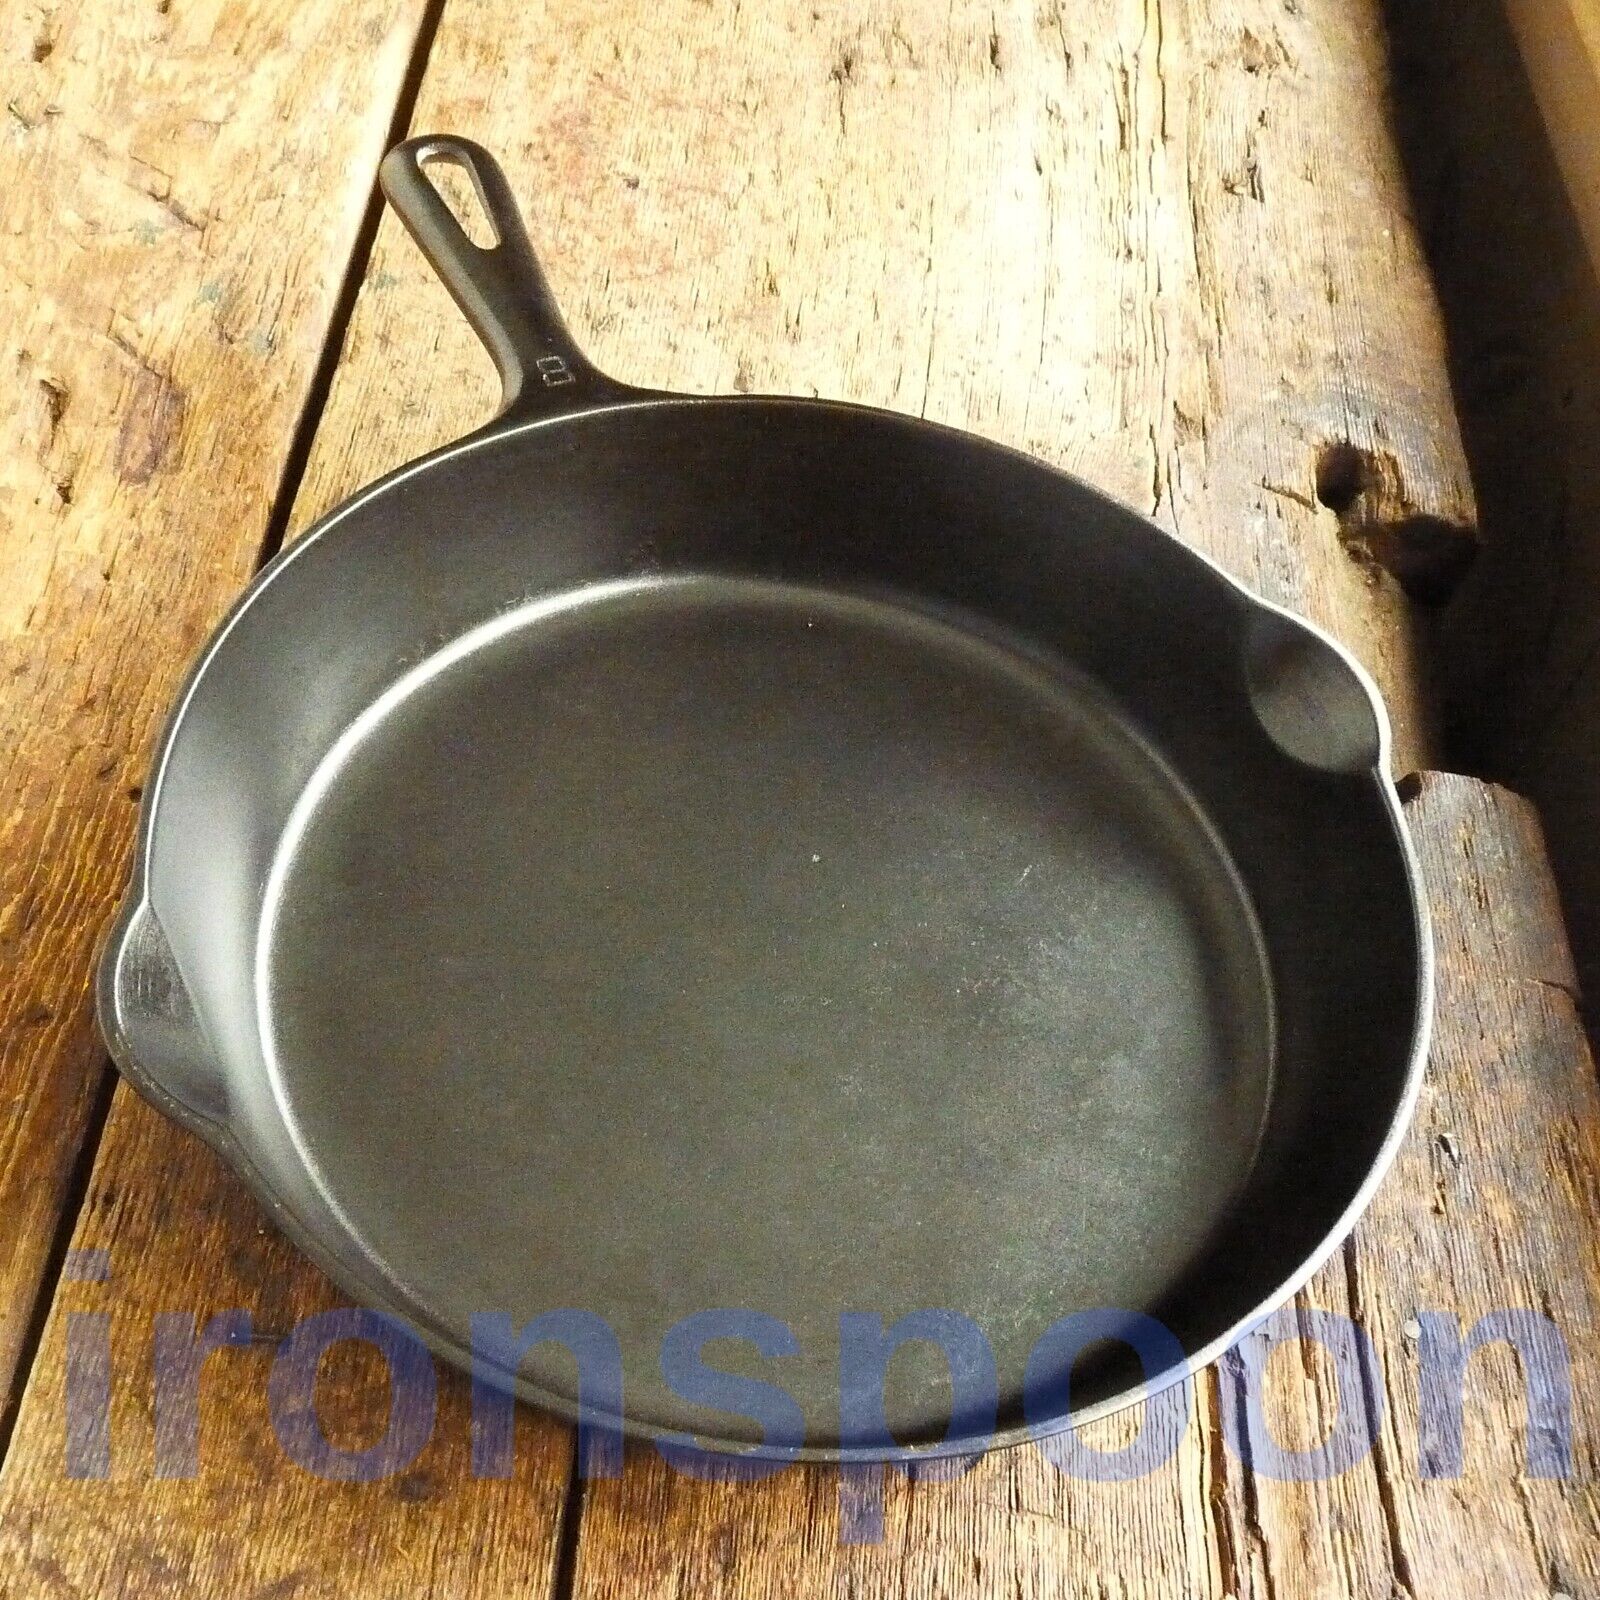 Vintage GRISWOLD Cast Iron SKILLET Frying Pan # 8 SMALL BLOCK LOGO - Ironspoon